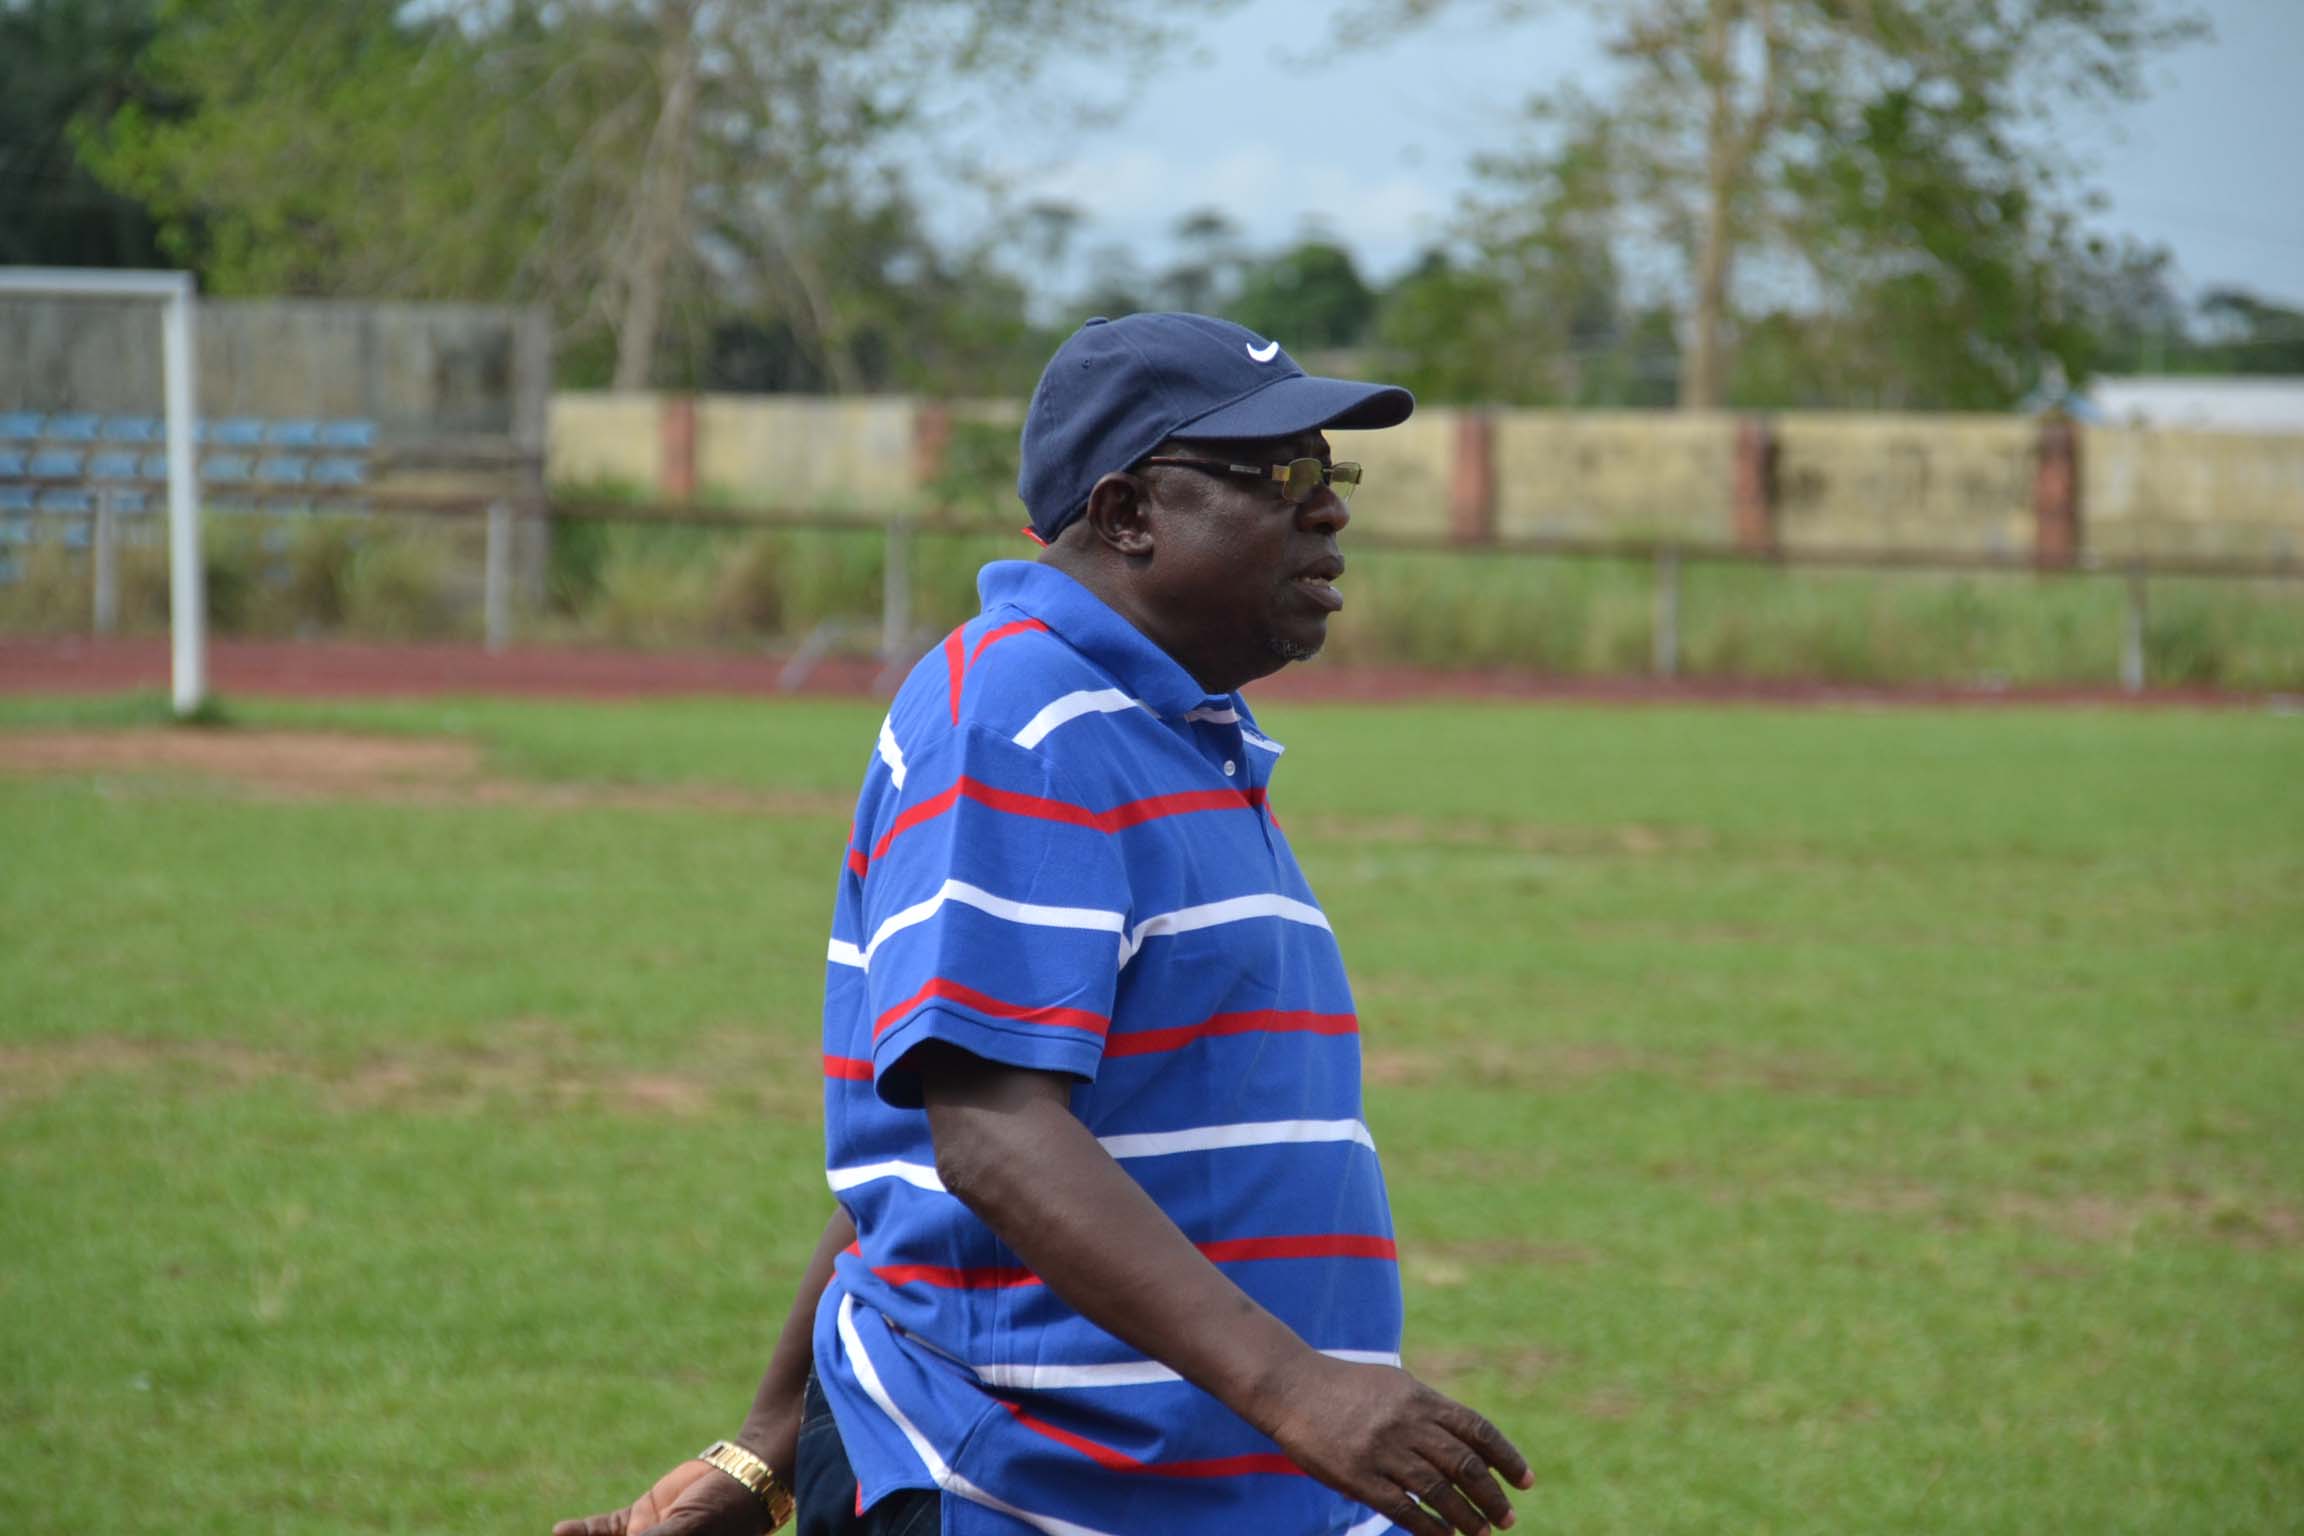 Coach solomon Ogbeide, the first coach to be fired this season